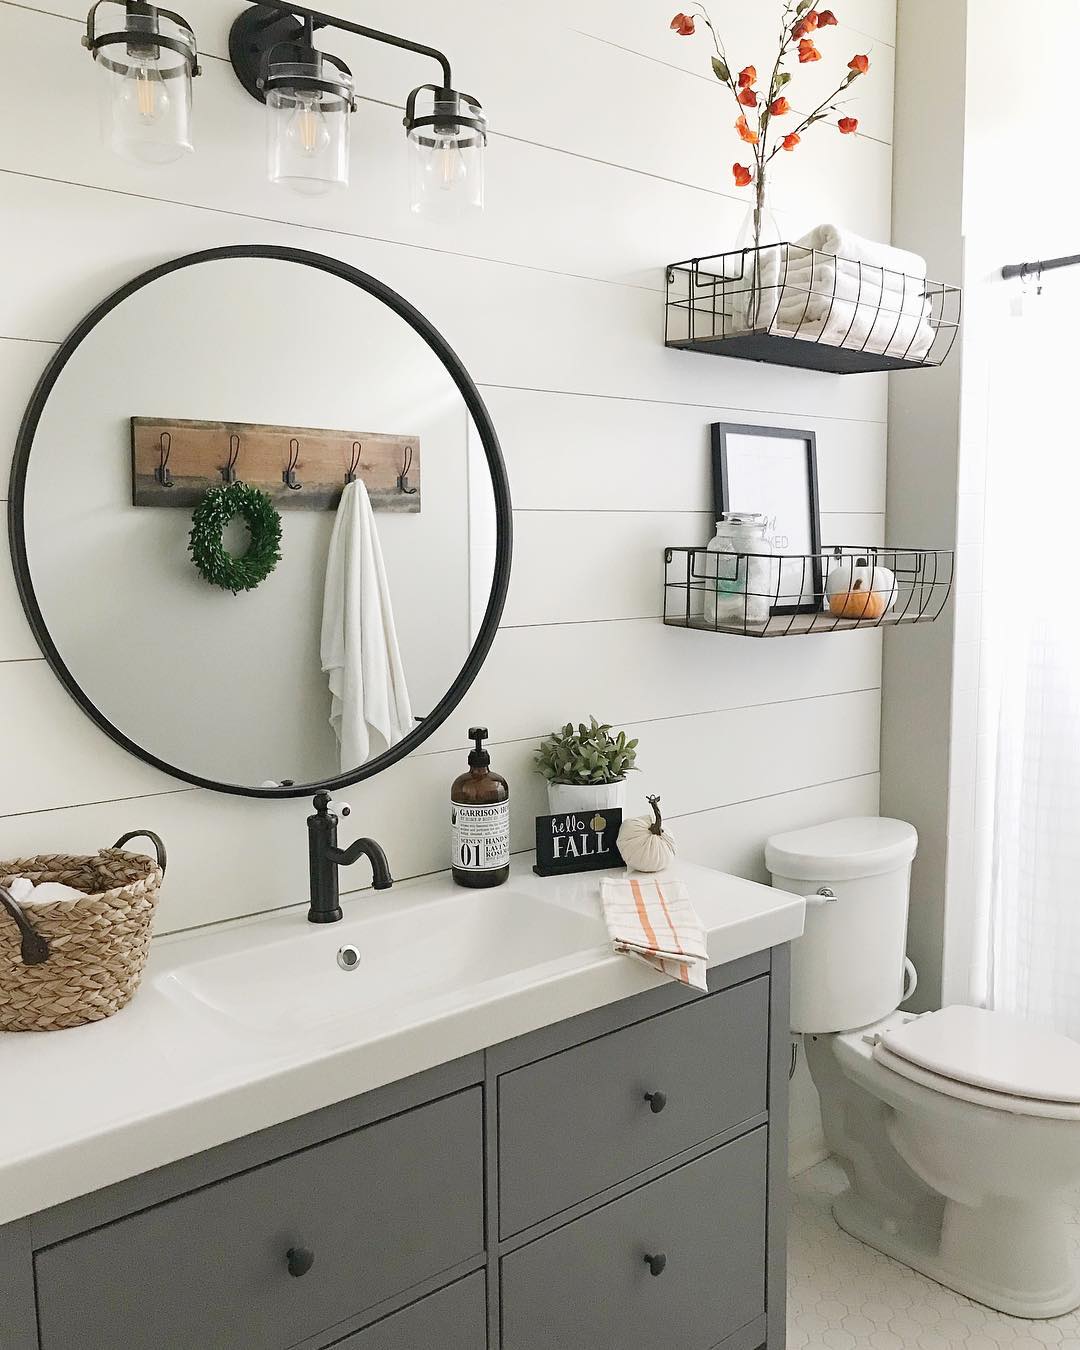 Home Bathroom with Fall Decorations and Wreaths. Photo by Instagram user @randrathome